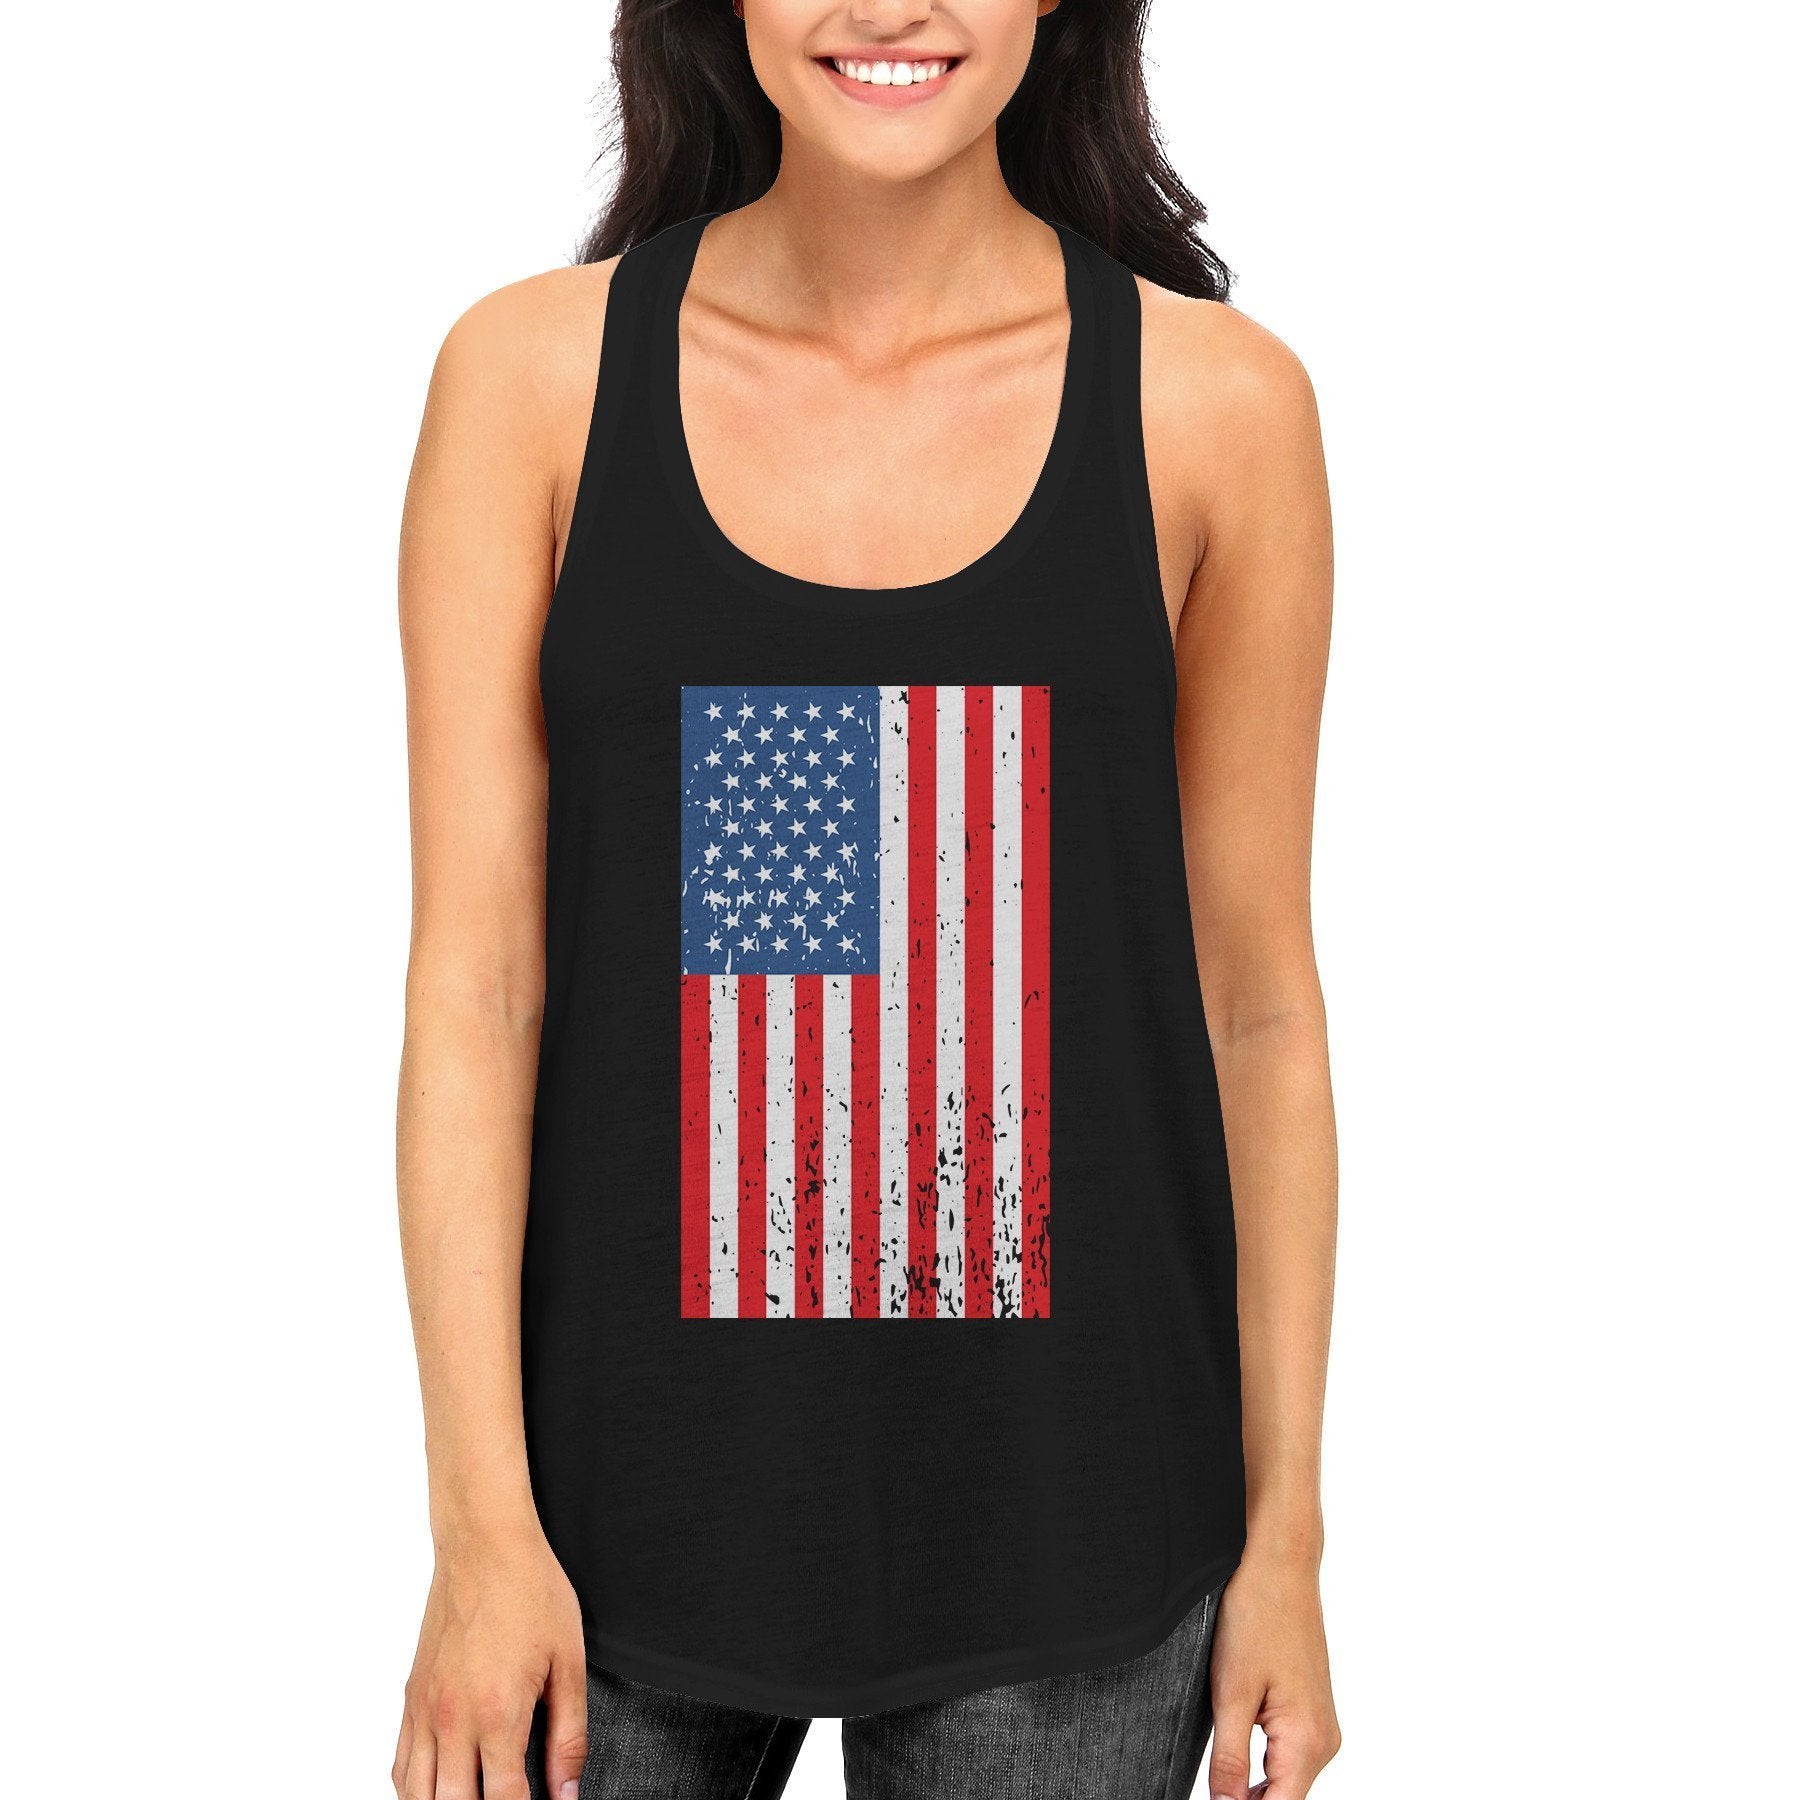 Distressed American Flag Black Women's Tank Tops for Independence Day-Gains Everyday